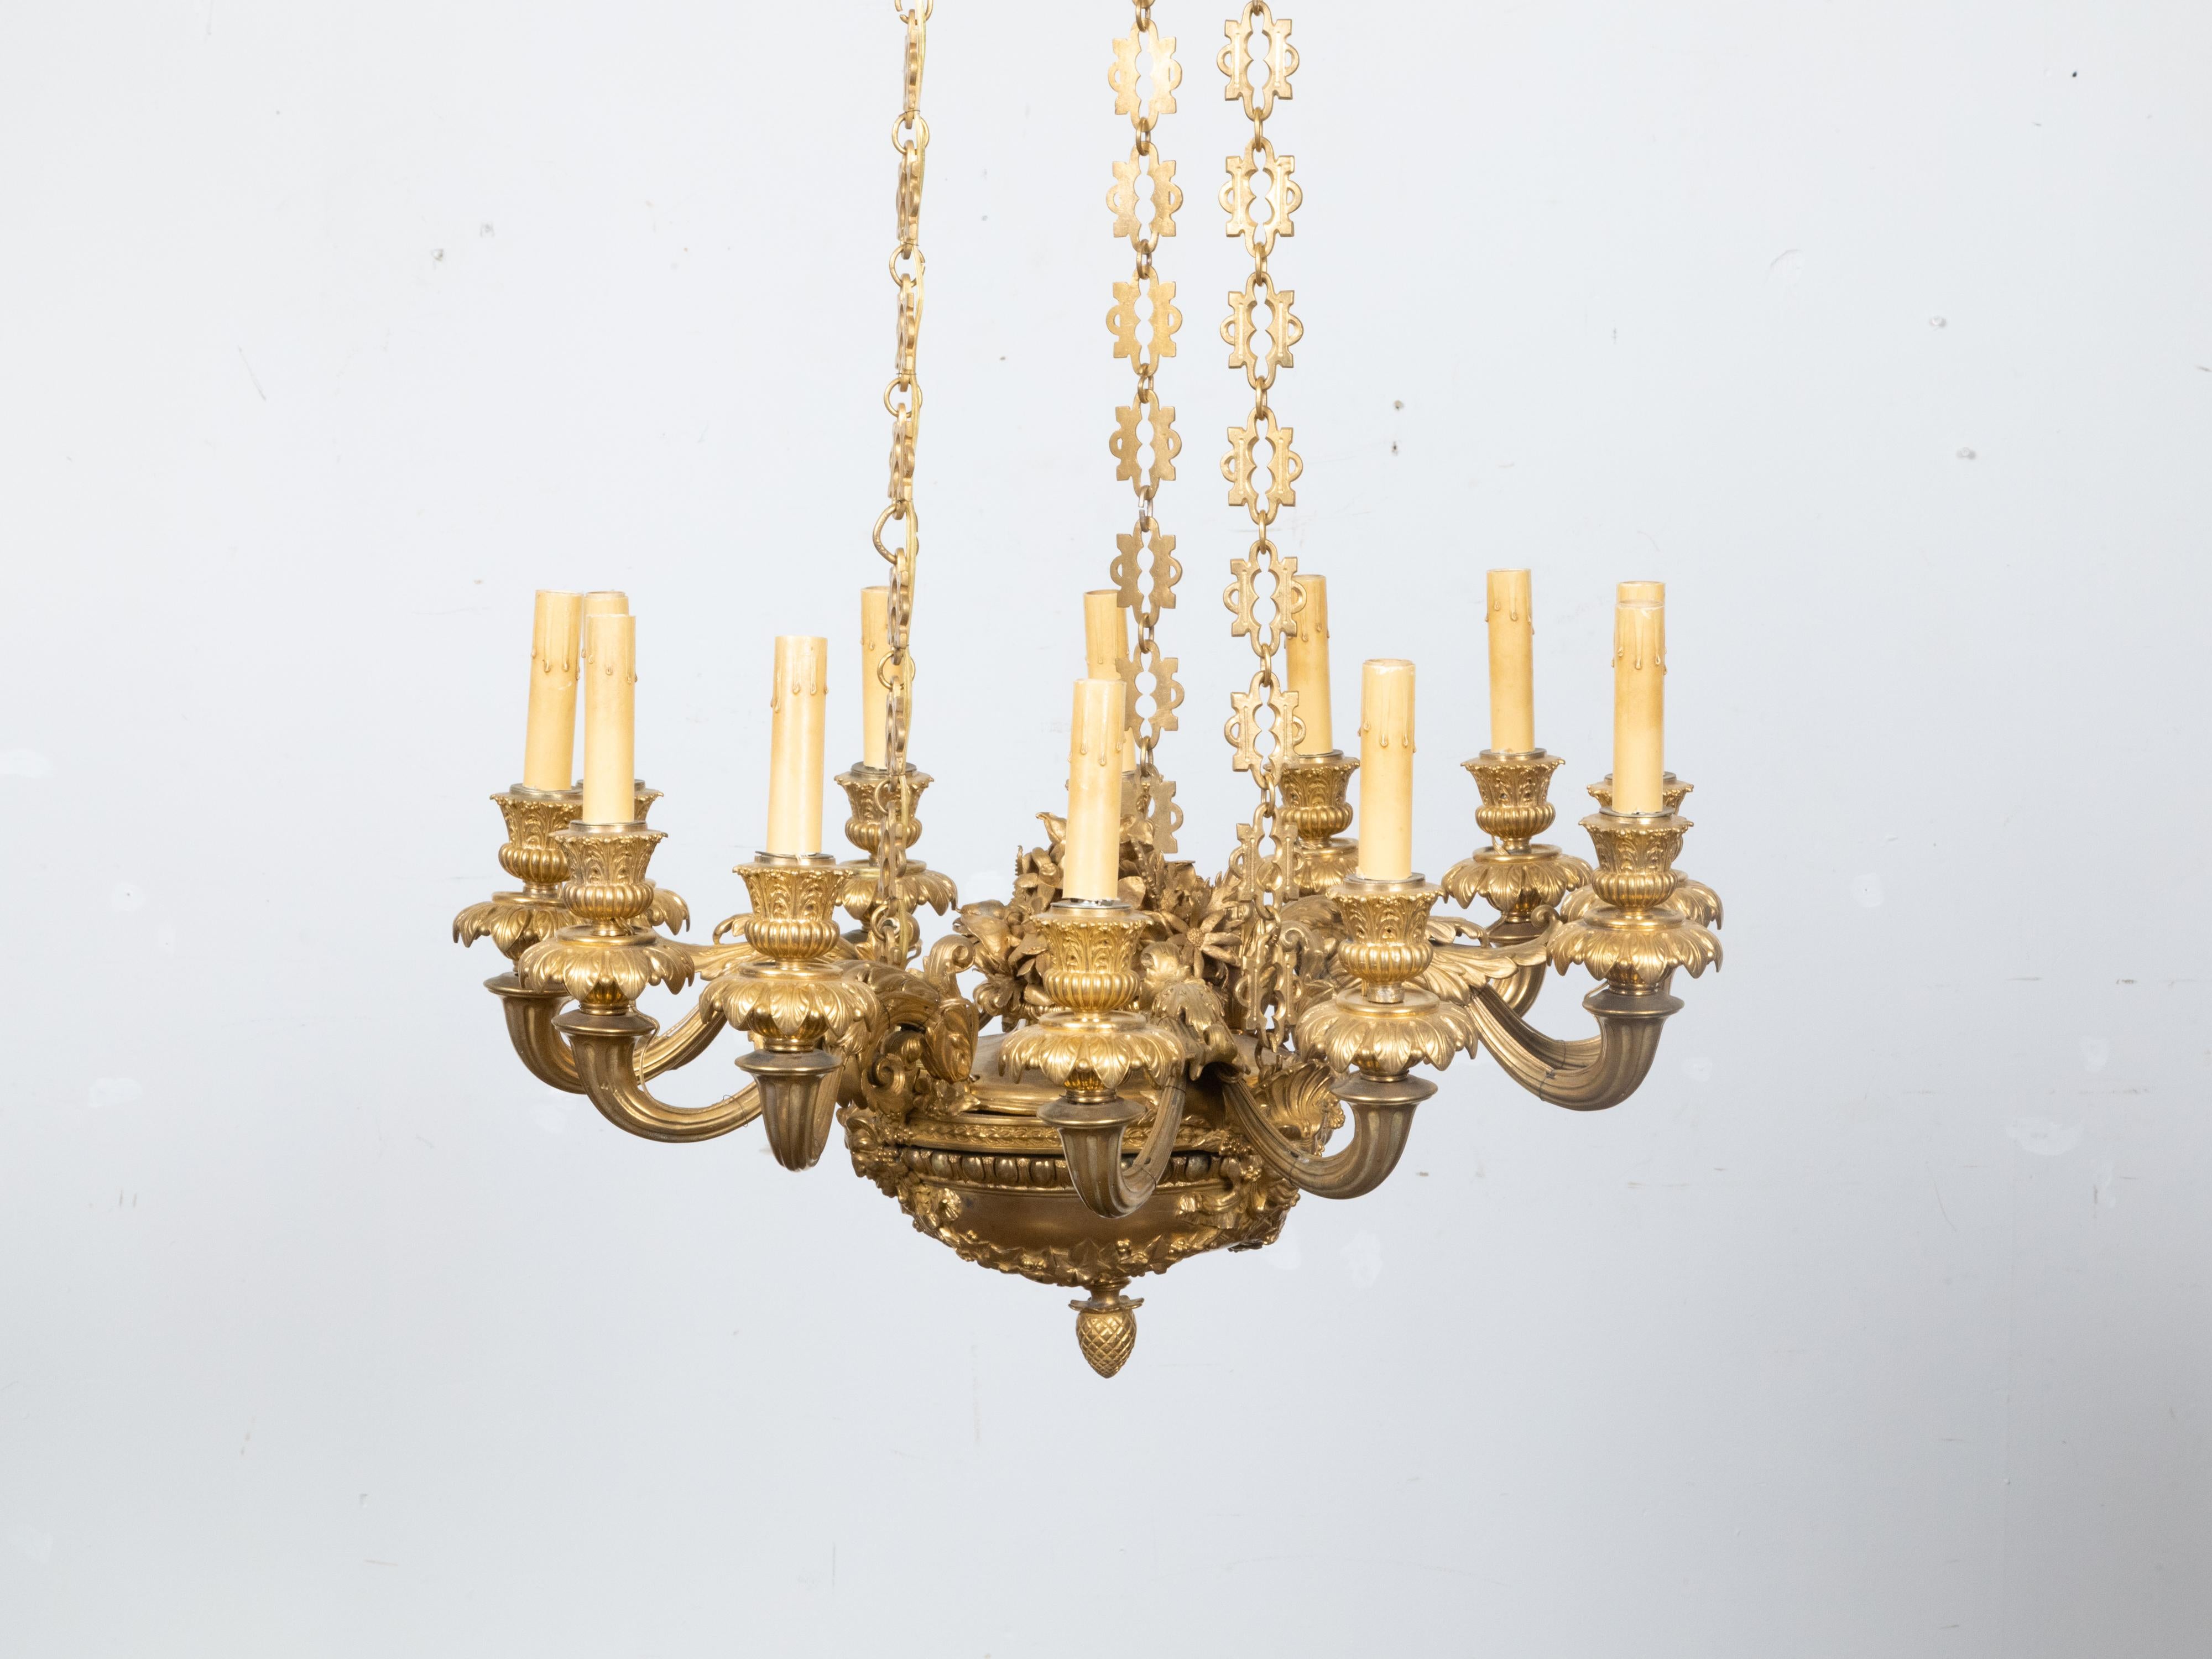 French Napoléon III 19th Century Gilt Bronze 12 Light Chandelier with Mascarons For Sale 5